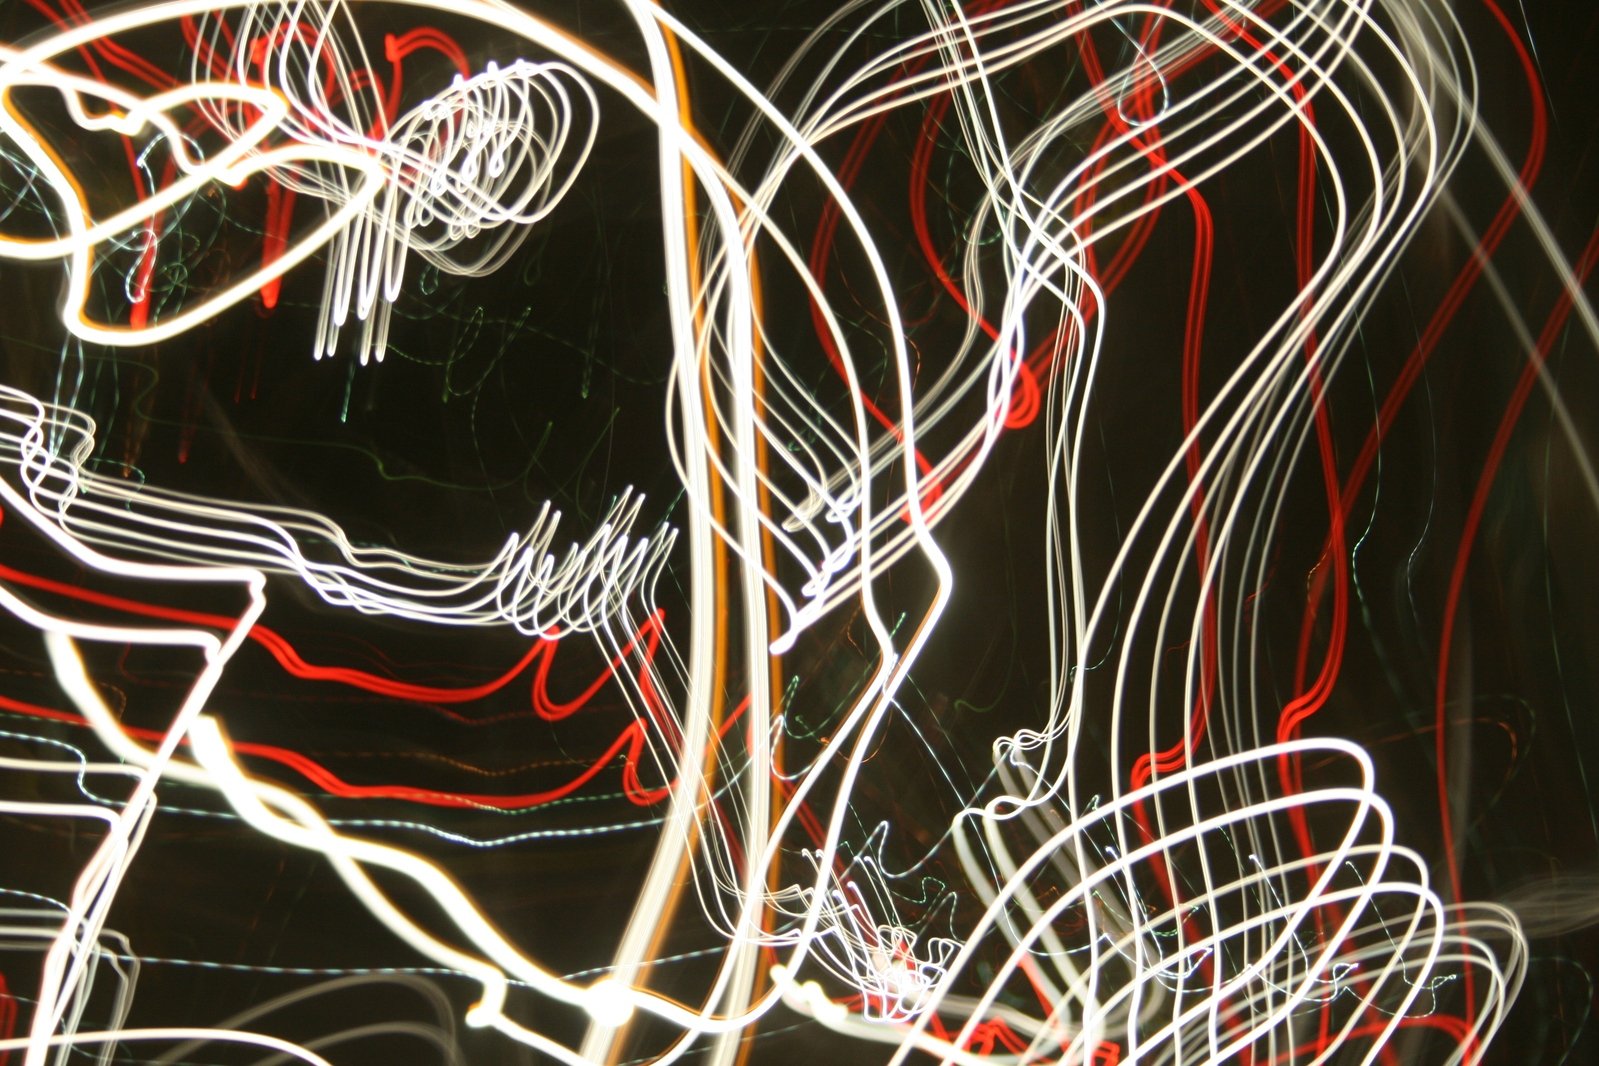 colorful light trails with bright red and white streaks